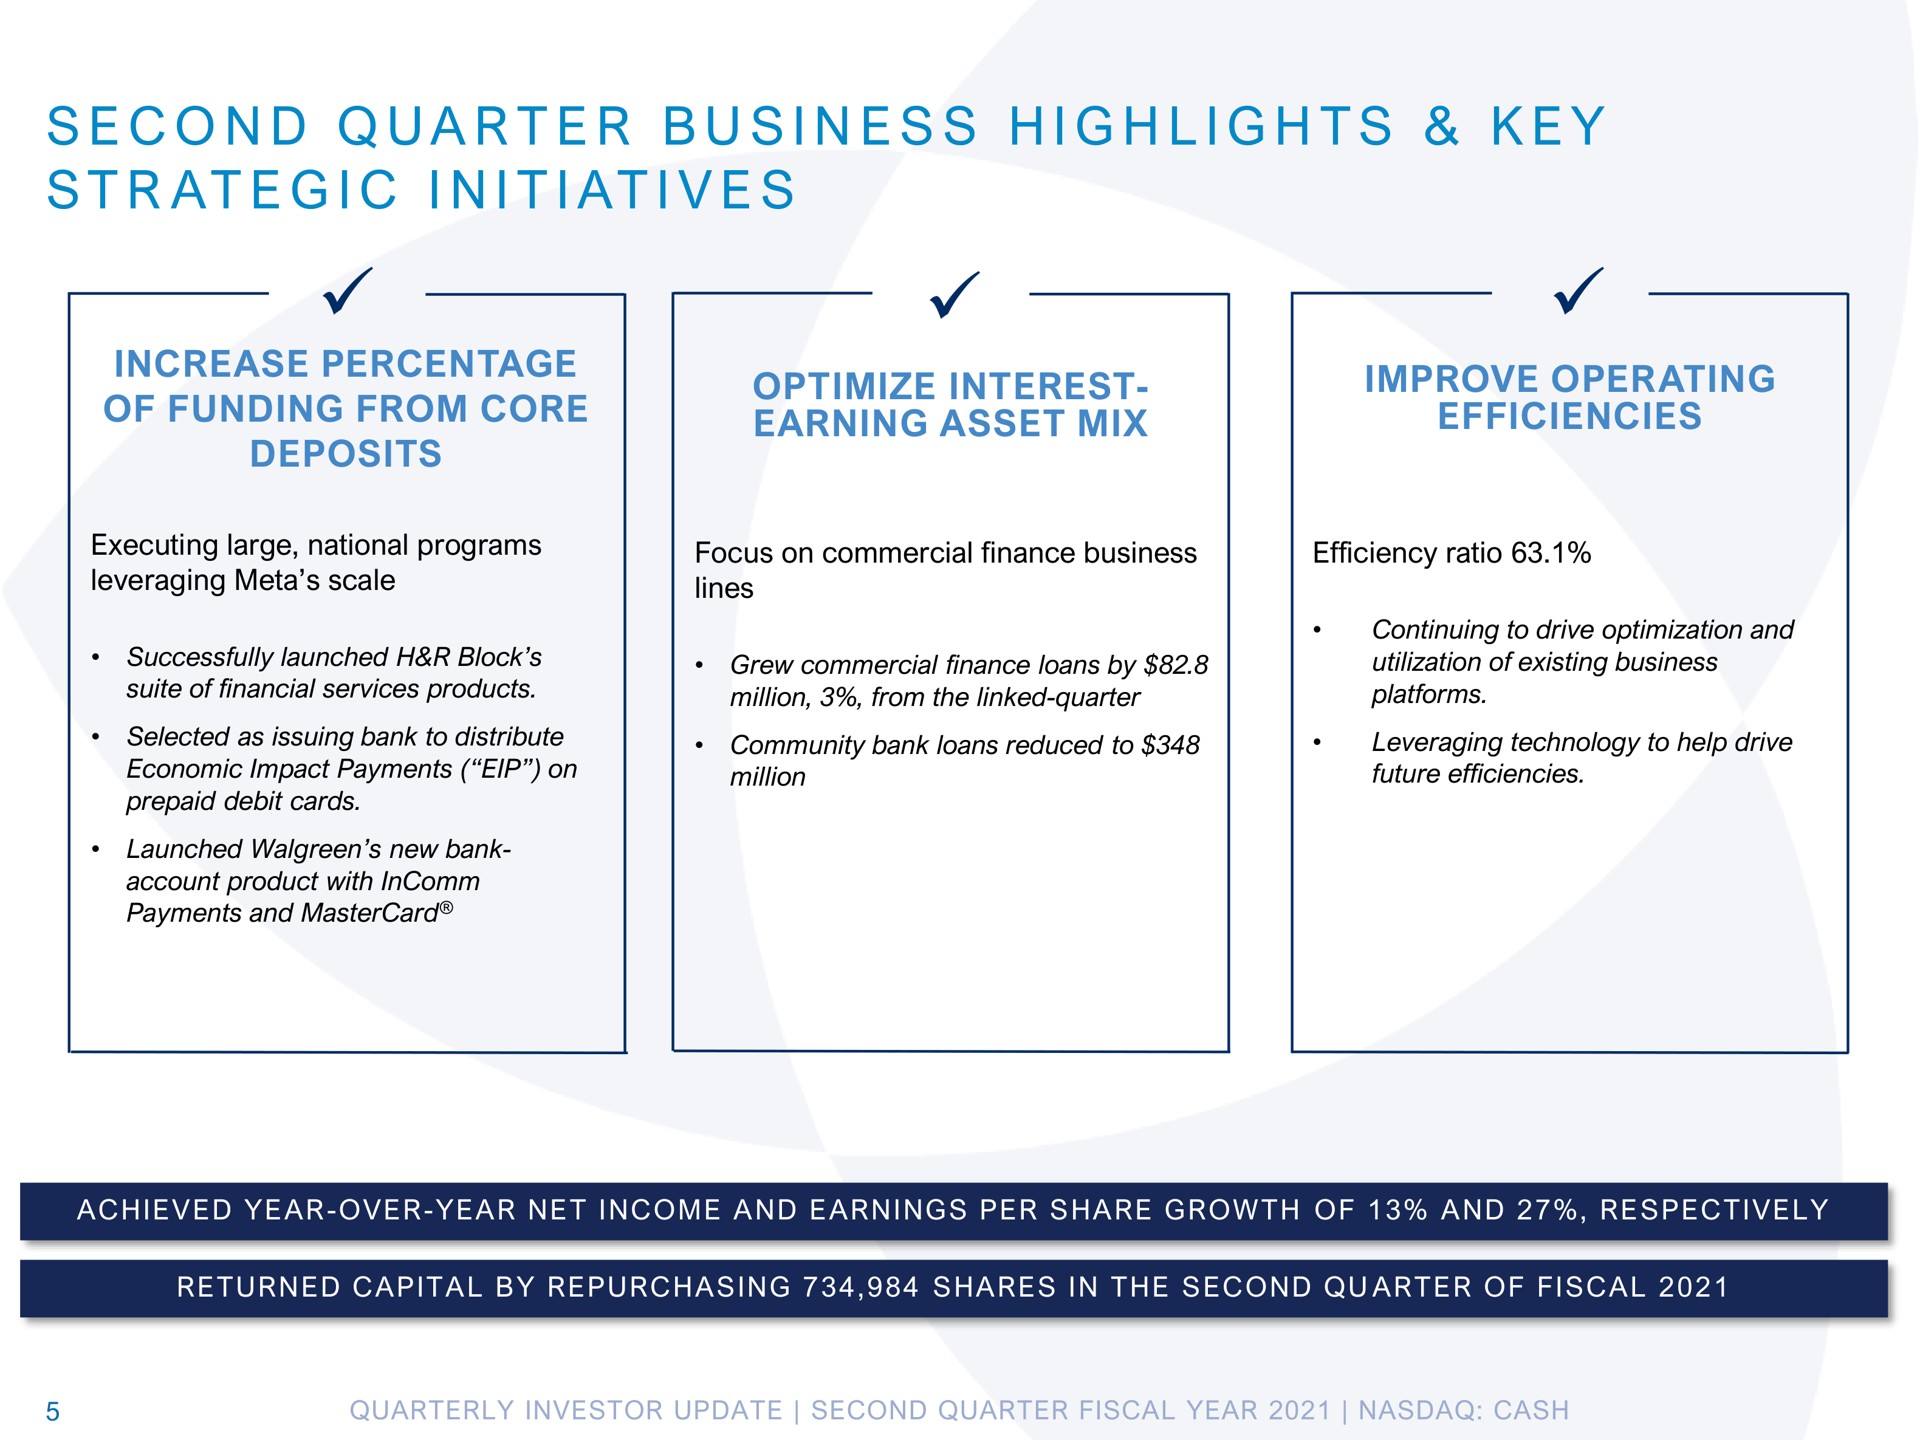 a i i i at i i i i at i increase percentage of funding from core deposits optimize interest earning asset mix improve operating efficiencies second quarter business highlights key strategic initiatives | Pathward Financial